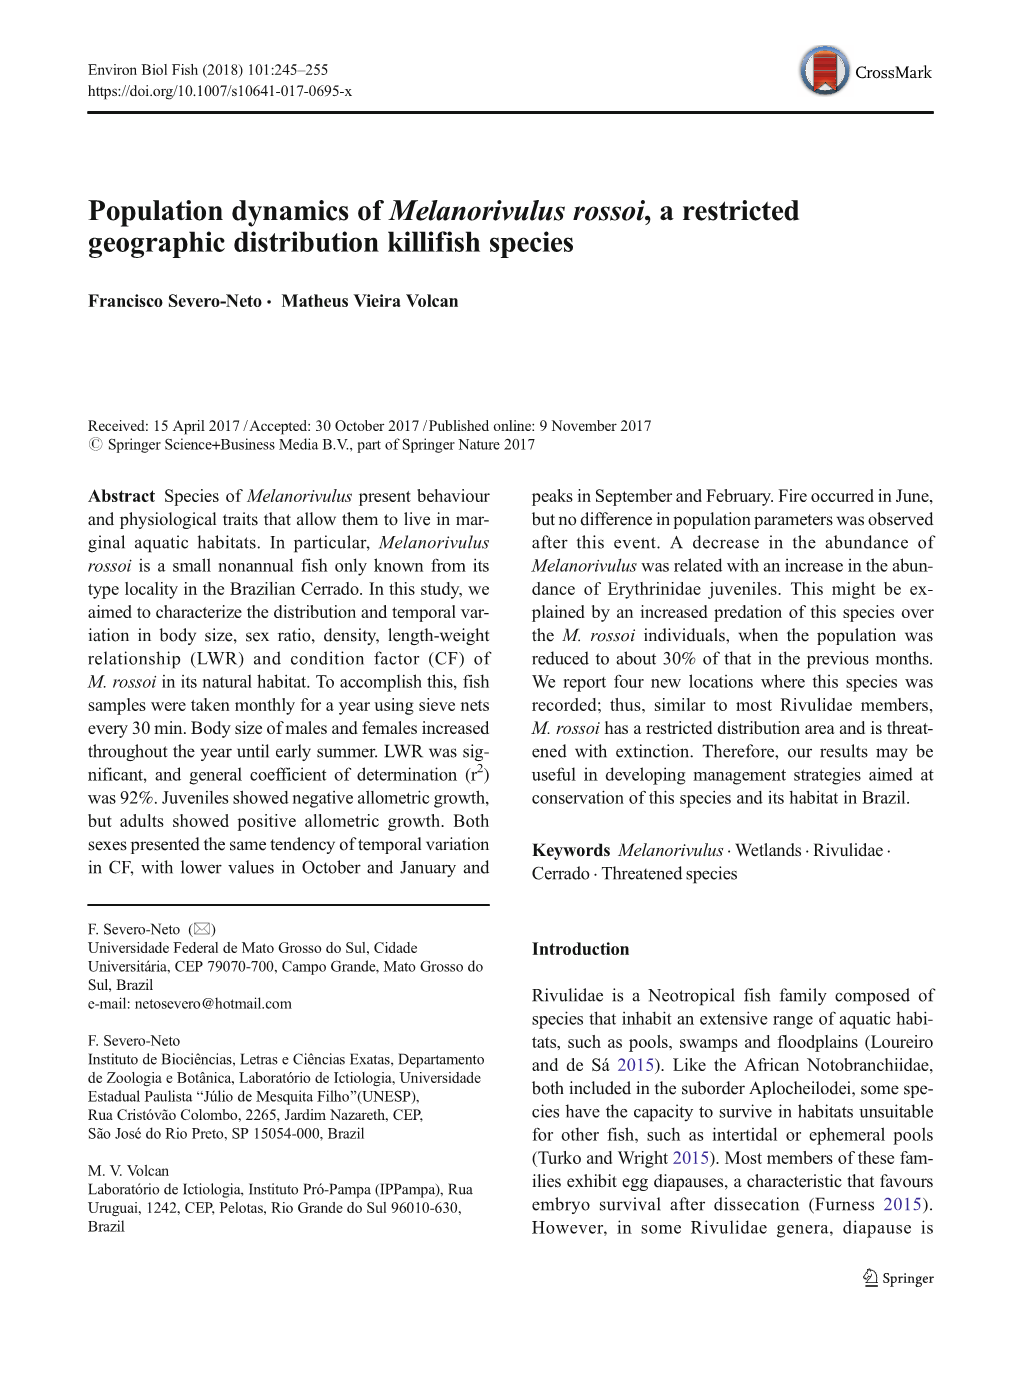 Population Dynamics of Melanorivulus Rossoi, a Restricted Geographic Distribution Killifish Species